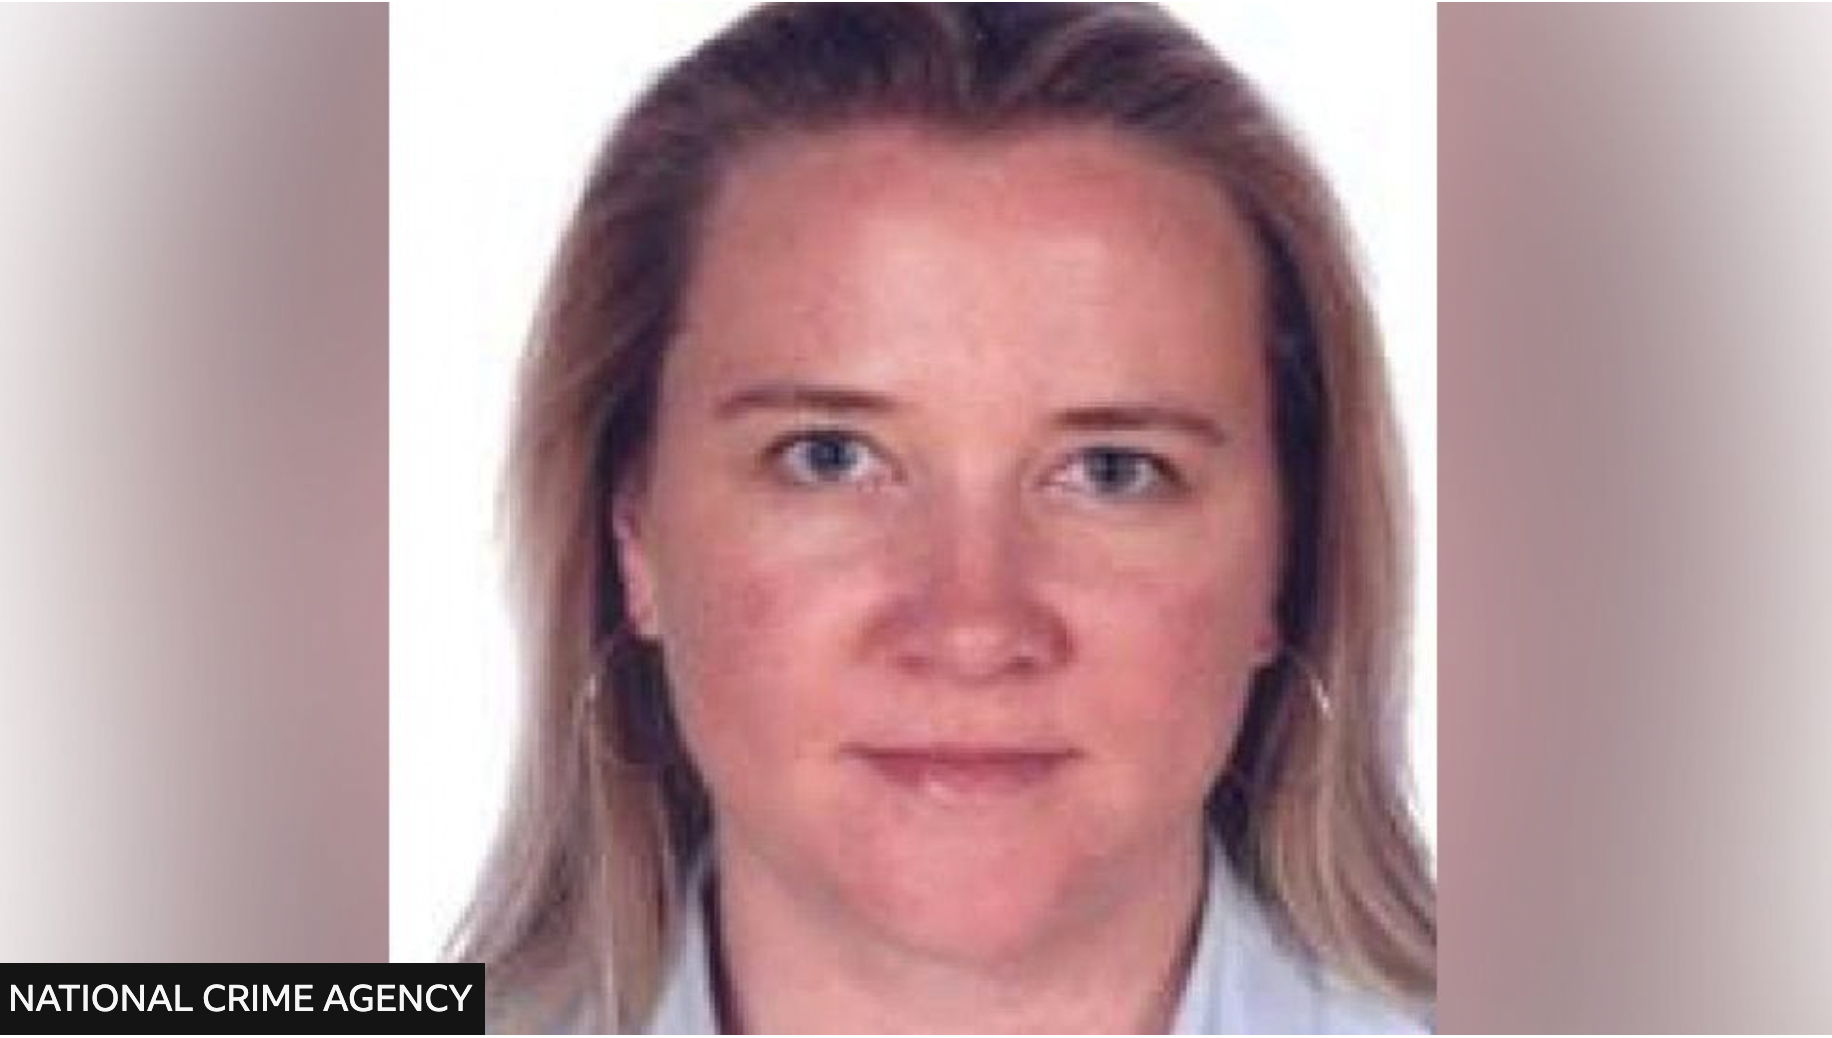 Sarah Panitzke, 48, became UK's most wanted woman after fleeing to Spain.